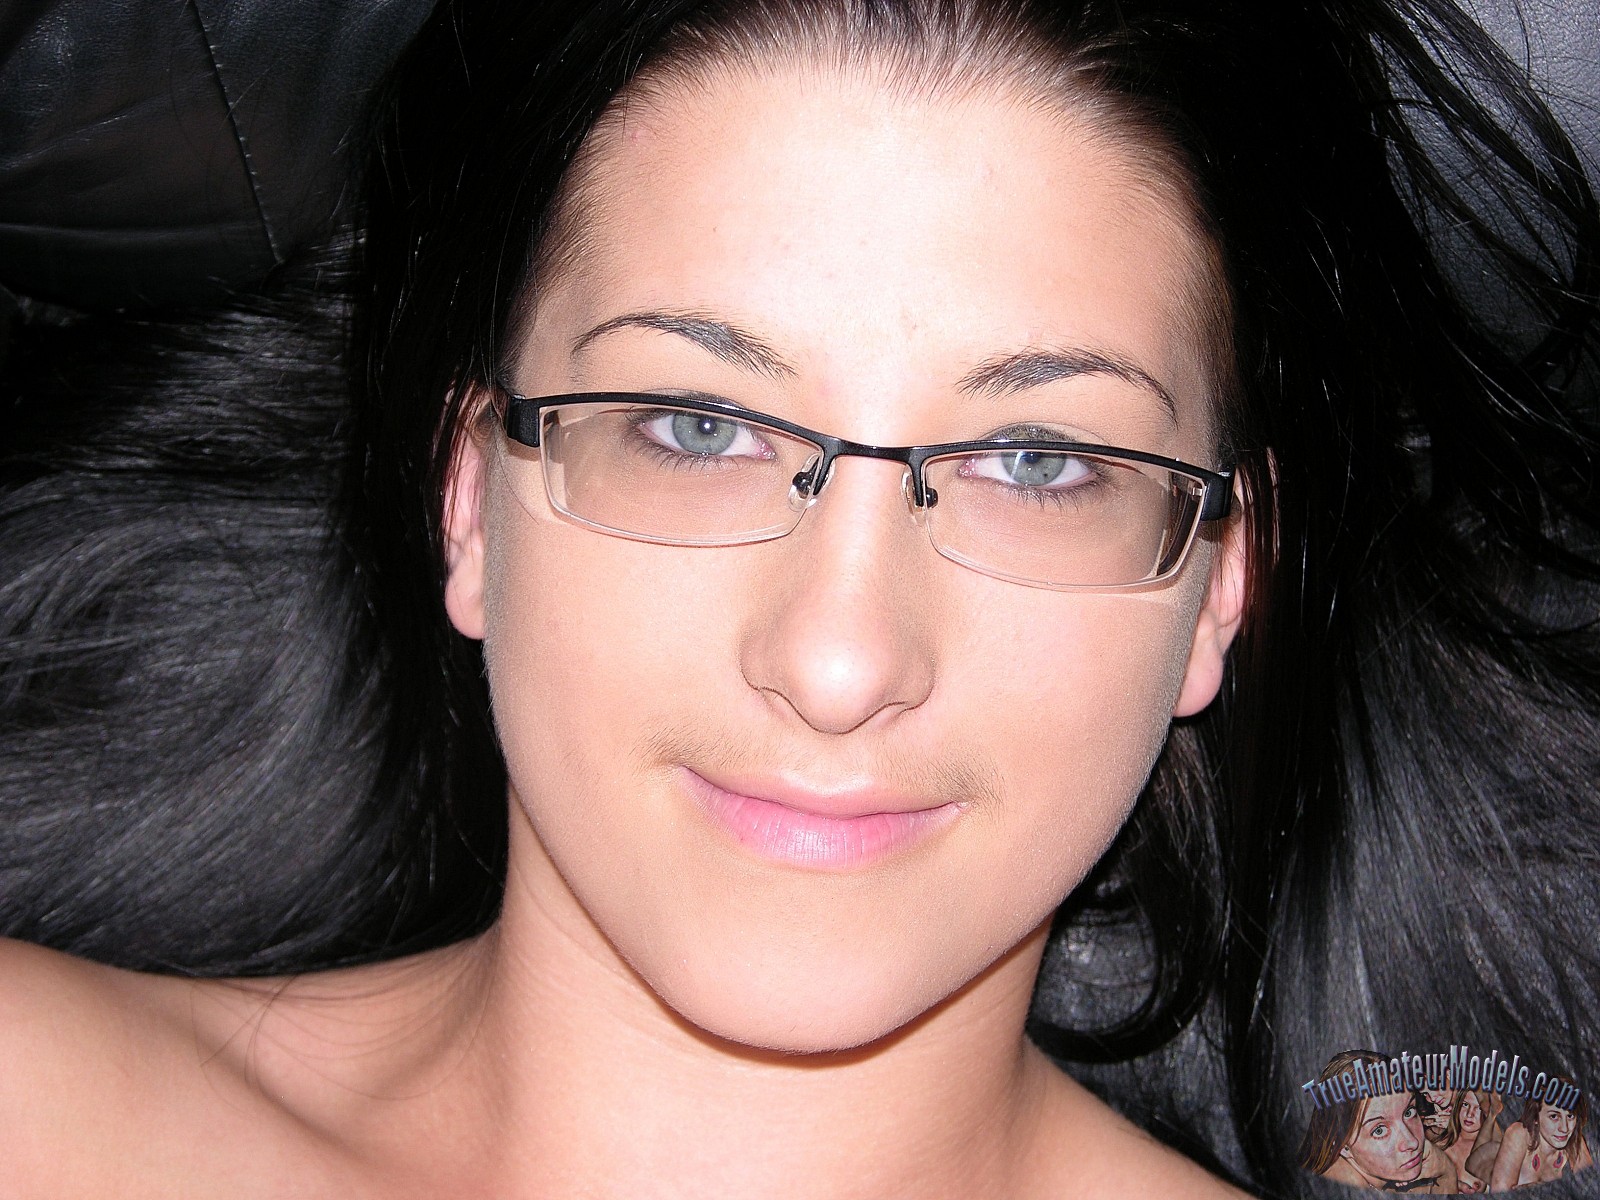 Sexy Girls wearing Glasses Page 286 Freeones Forum